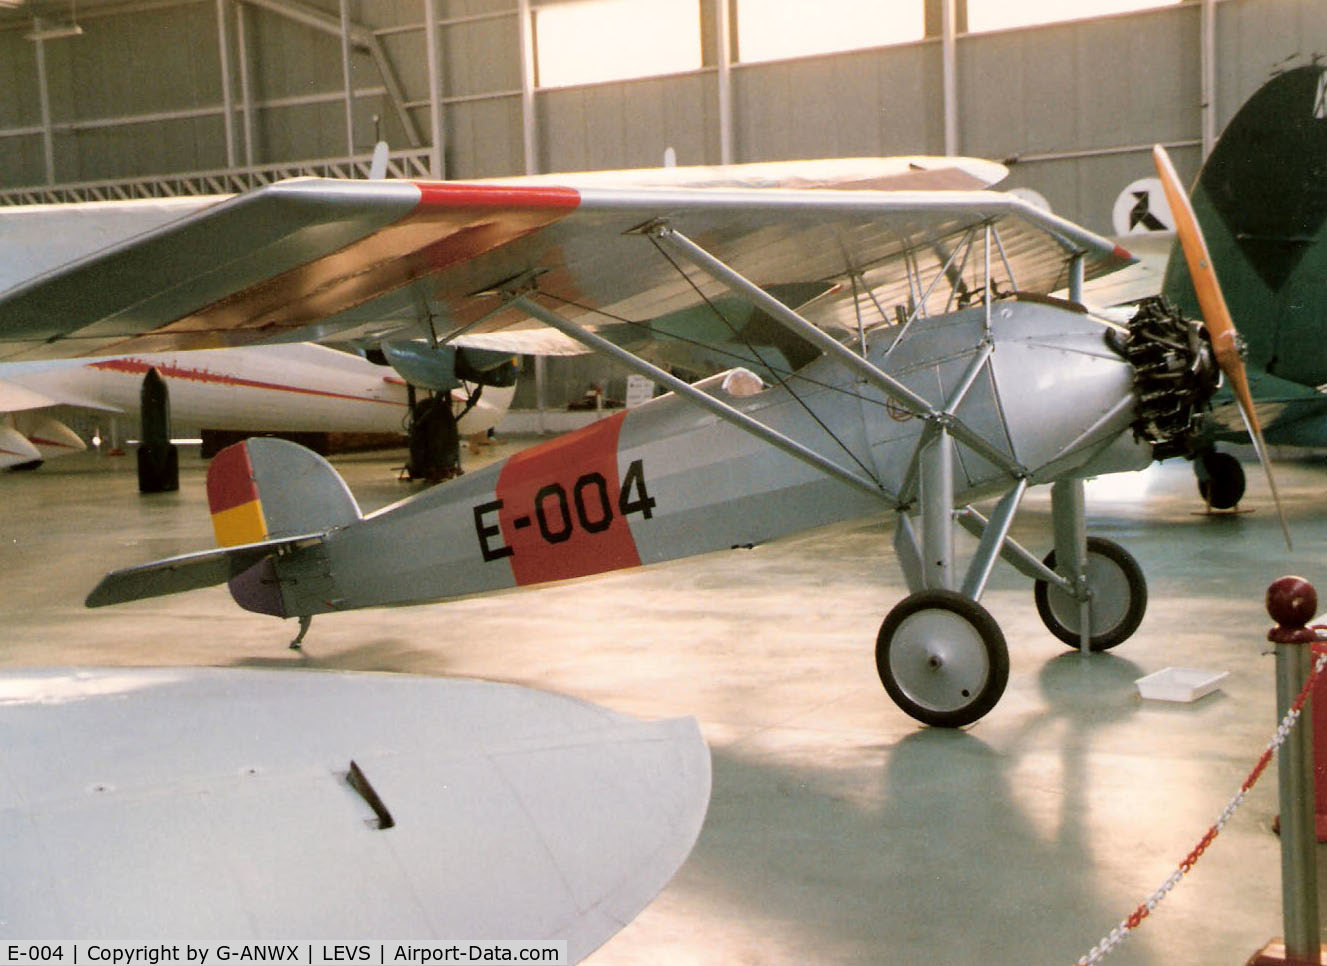 E-004, Morane-Saulnier MS-181 C/N Not found E-004, Morane of the Spanish Air Force, preserved at the Spanish Aircraft Museum, 1996